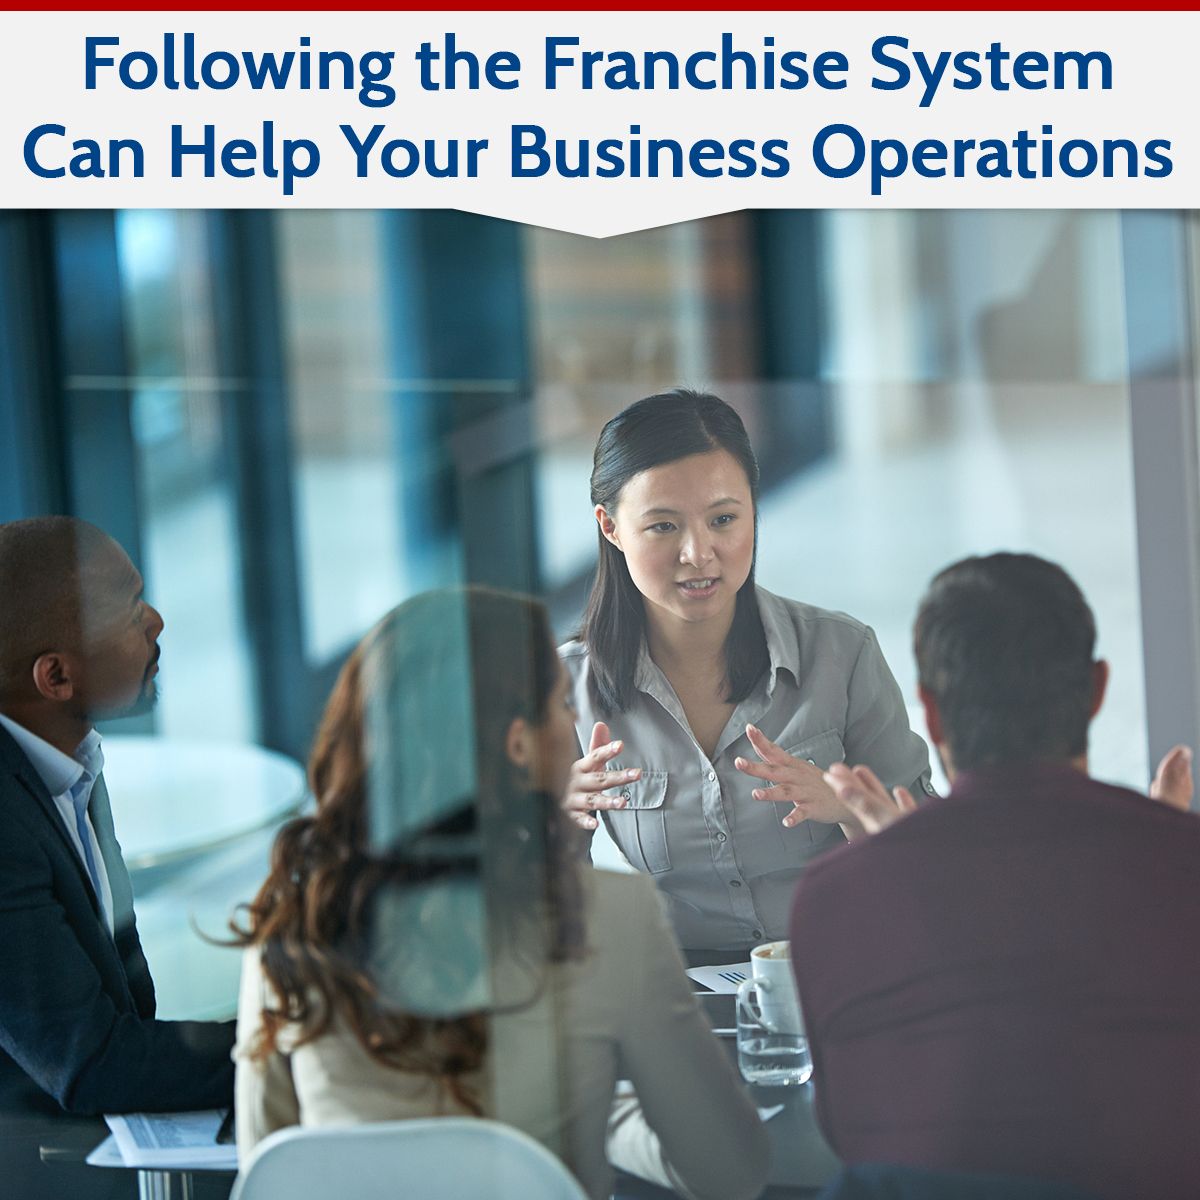 Following the Franchise System Can Help Your Business Operations